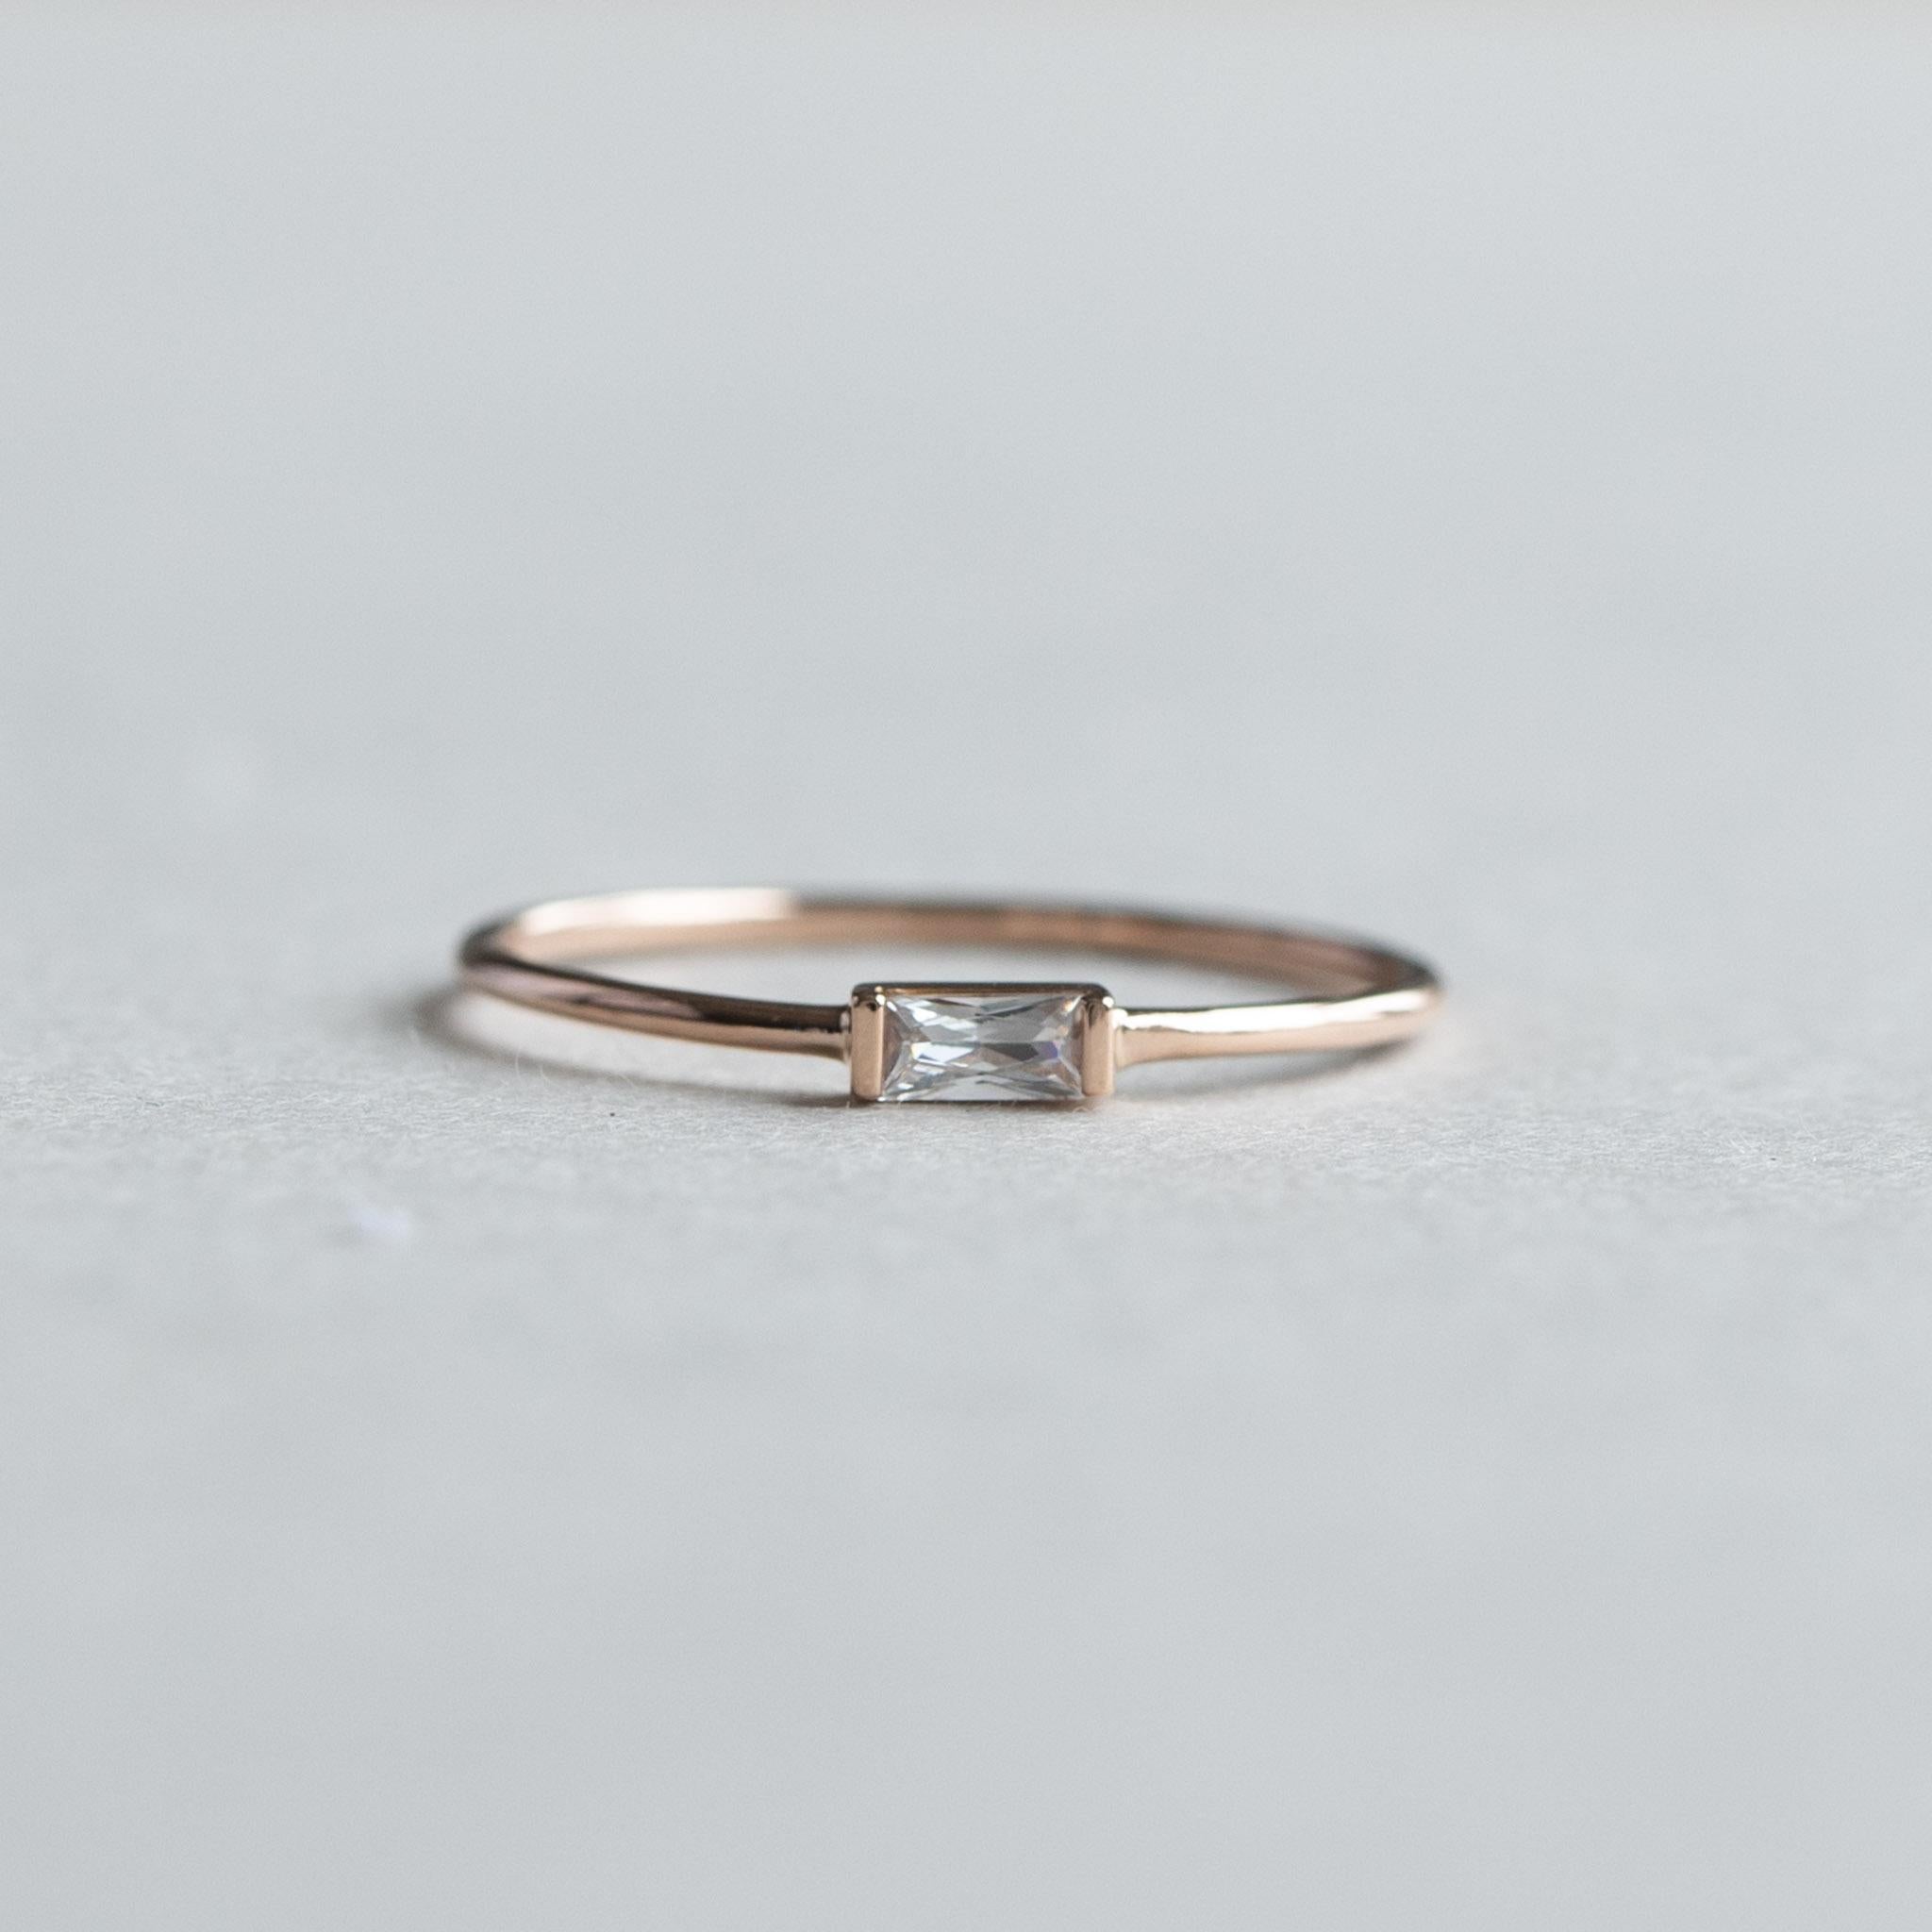 East west baguette accents this slim whisper thin ring.
14k solid gold or rose gold available
Cubic Zirconia stone set on half bezel setting
14k hallmarked
Stone Size: 2mmx5mm
1 mm band width.

Size 7 ready to ship 
